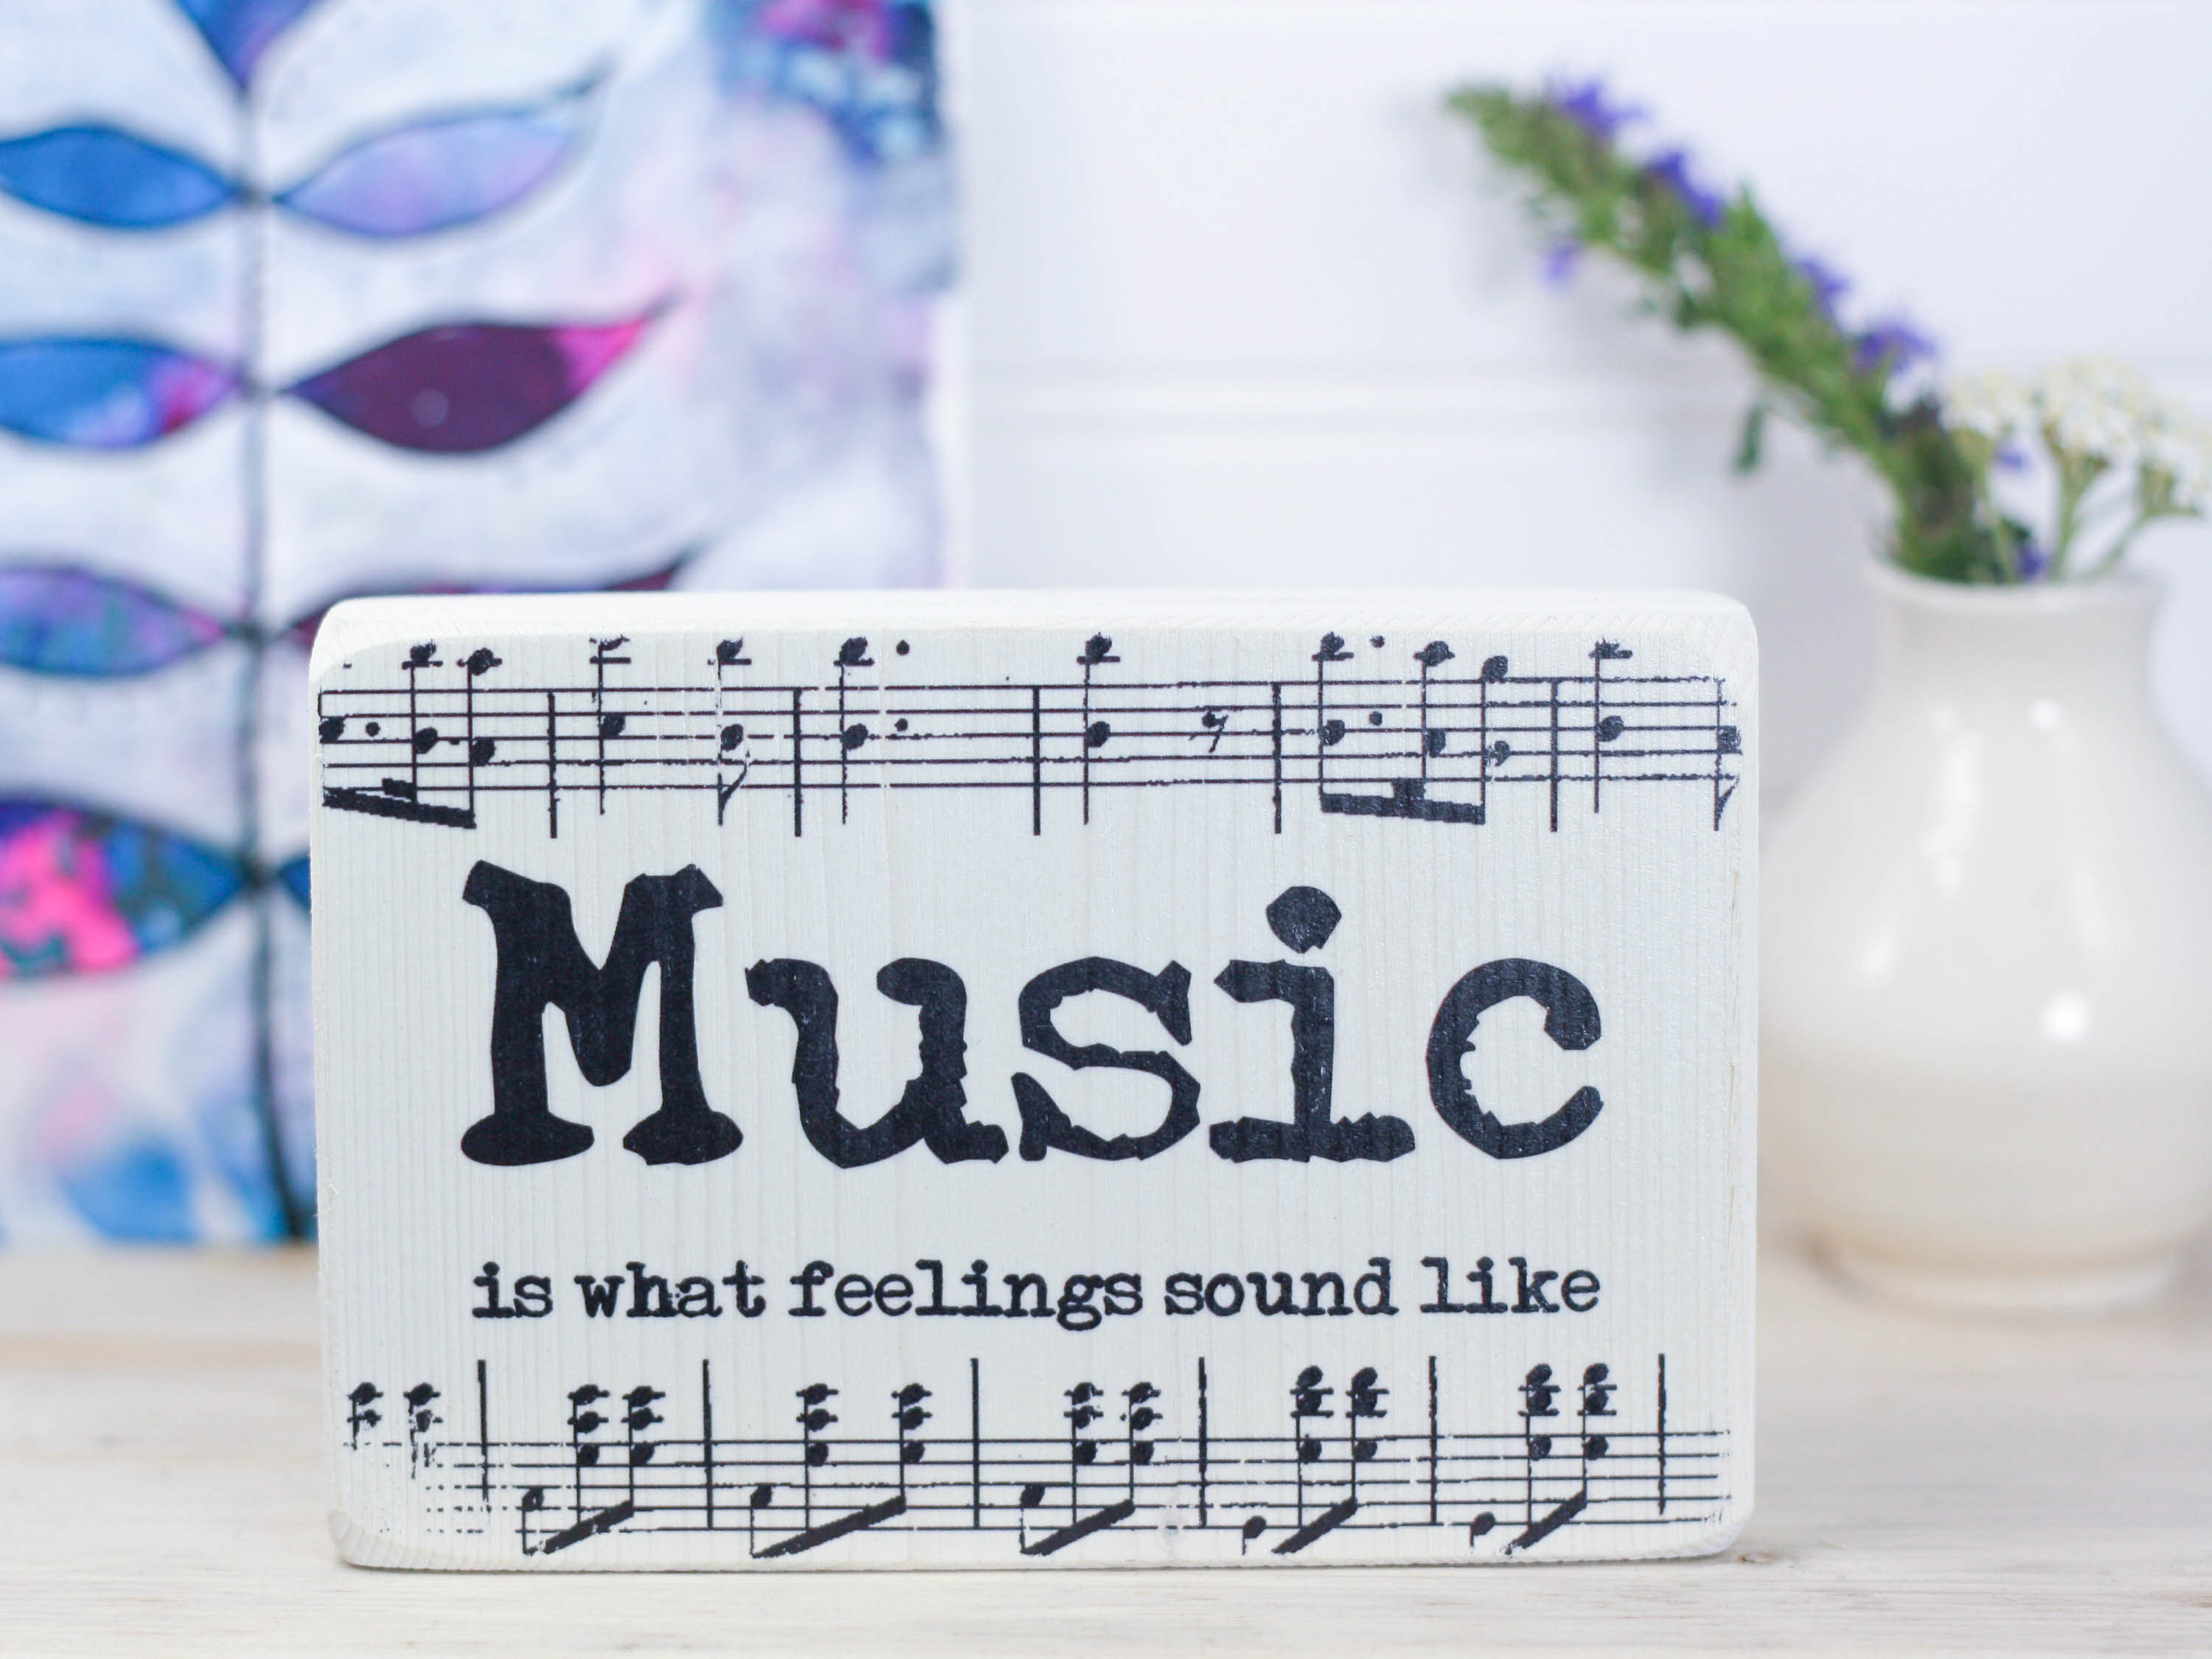 Small wood sign in whitewash with music notes and the saying "Music is what feelings sound like".